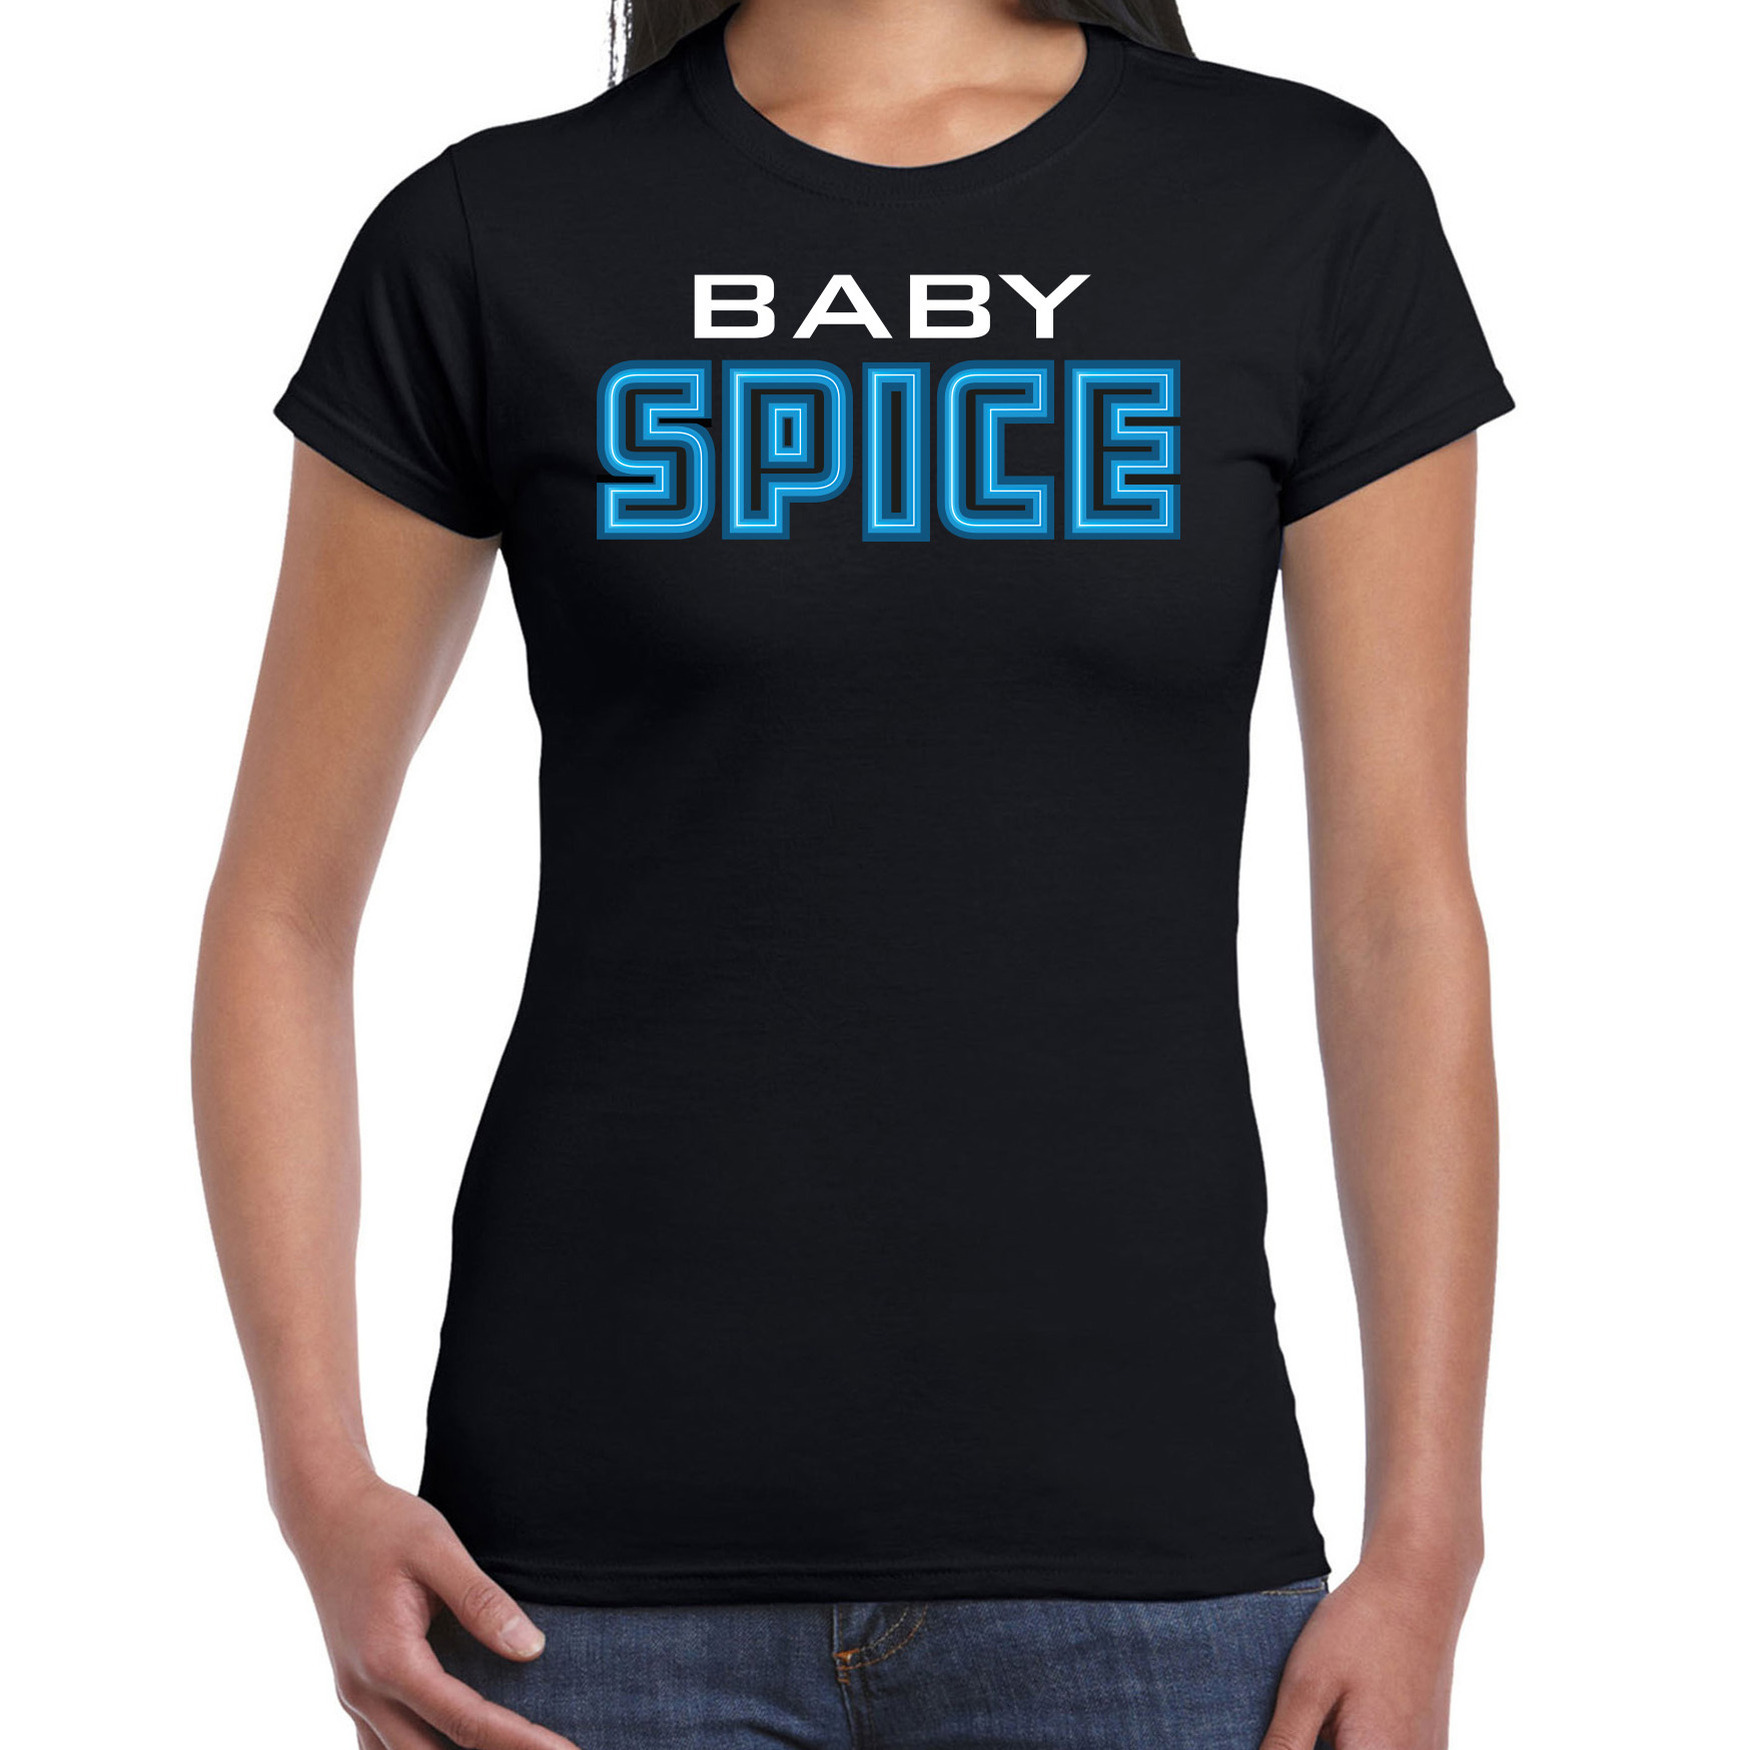 Spicy girls t-shirt dames baby spice blauw carnaval-90s party themafeest